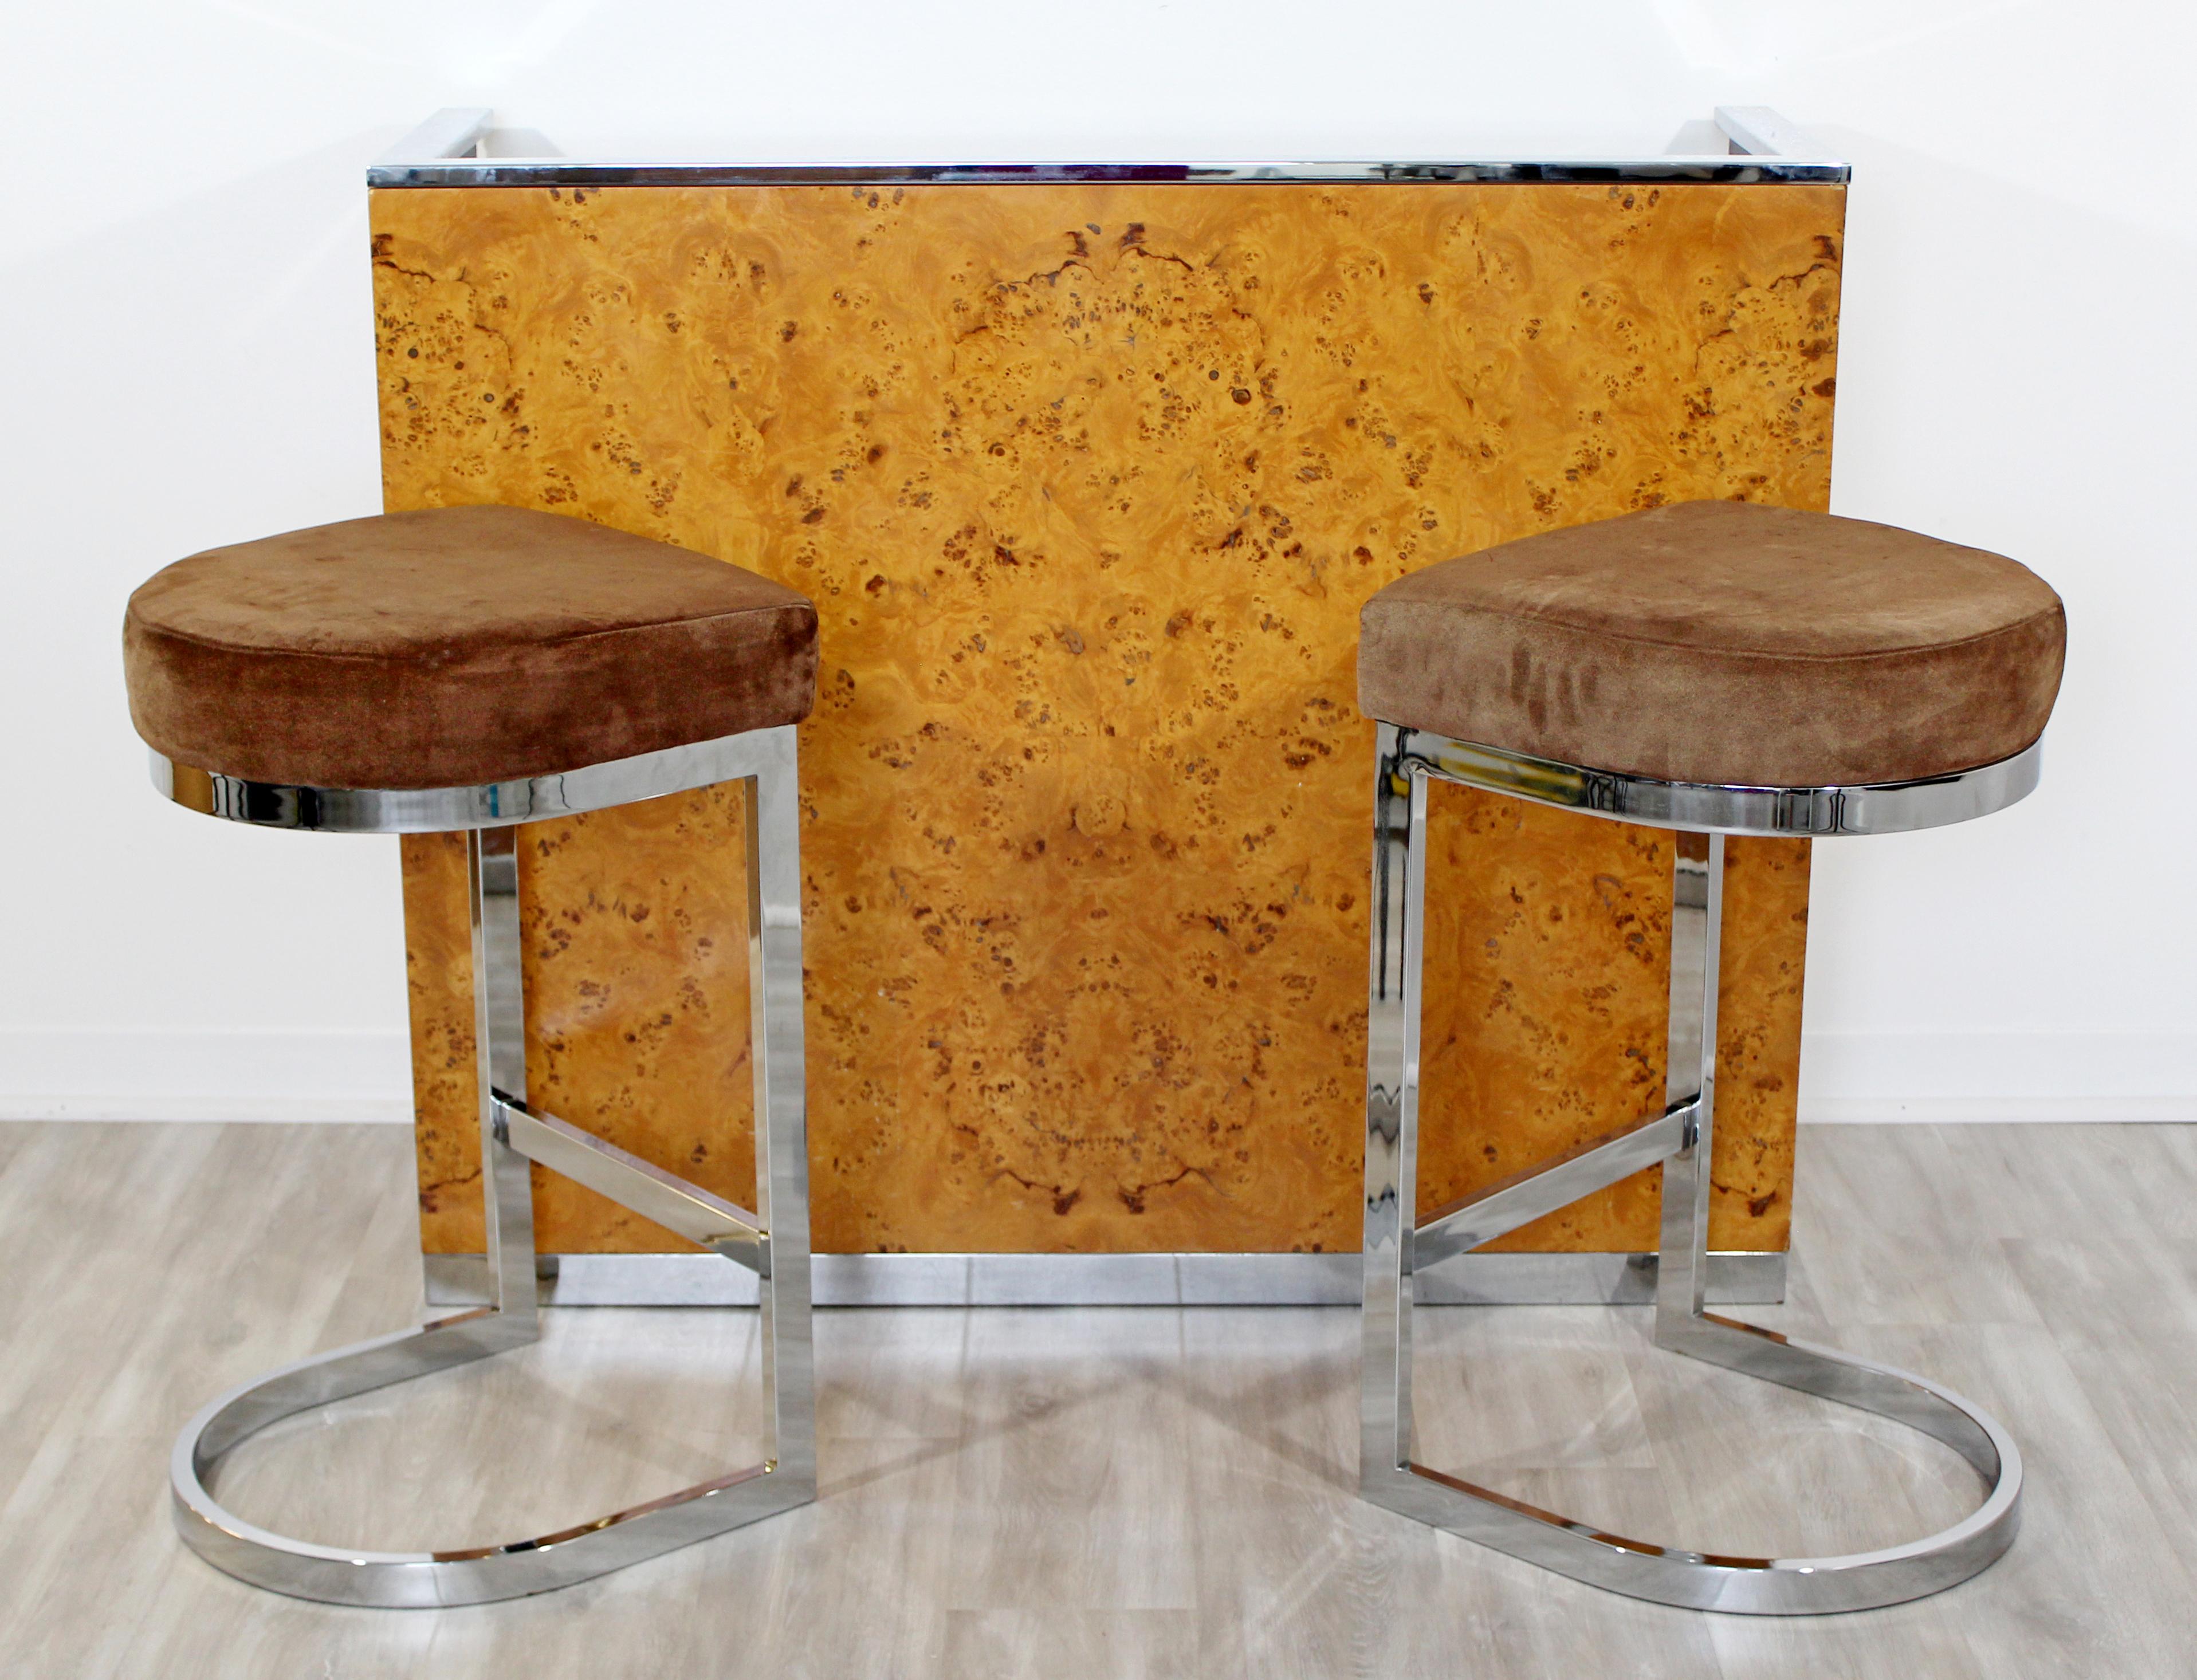 For your consideration is a beautiful, burl wood, chrome and black lacquer bar, with a pair of matching cantilever chrome bar stools, by Milo Baughman, circa 1970s. In very good vintage condition. The dimensions of the bar are 48